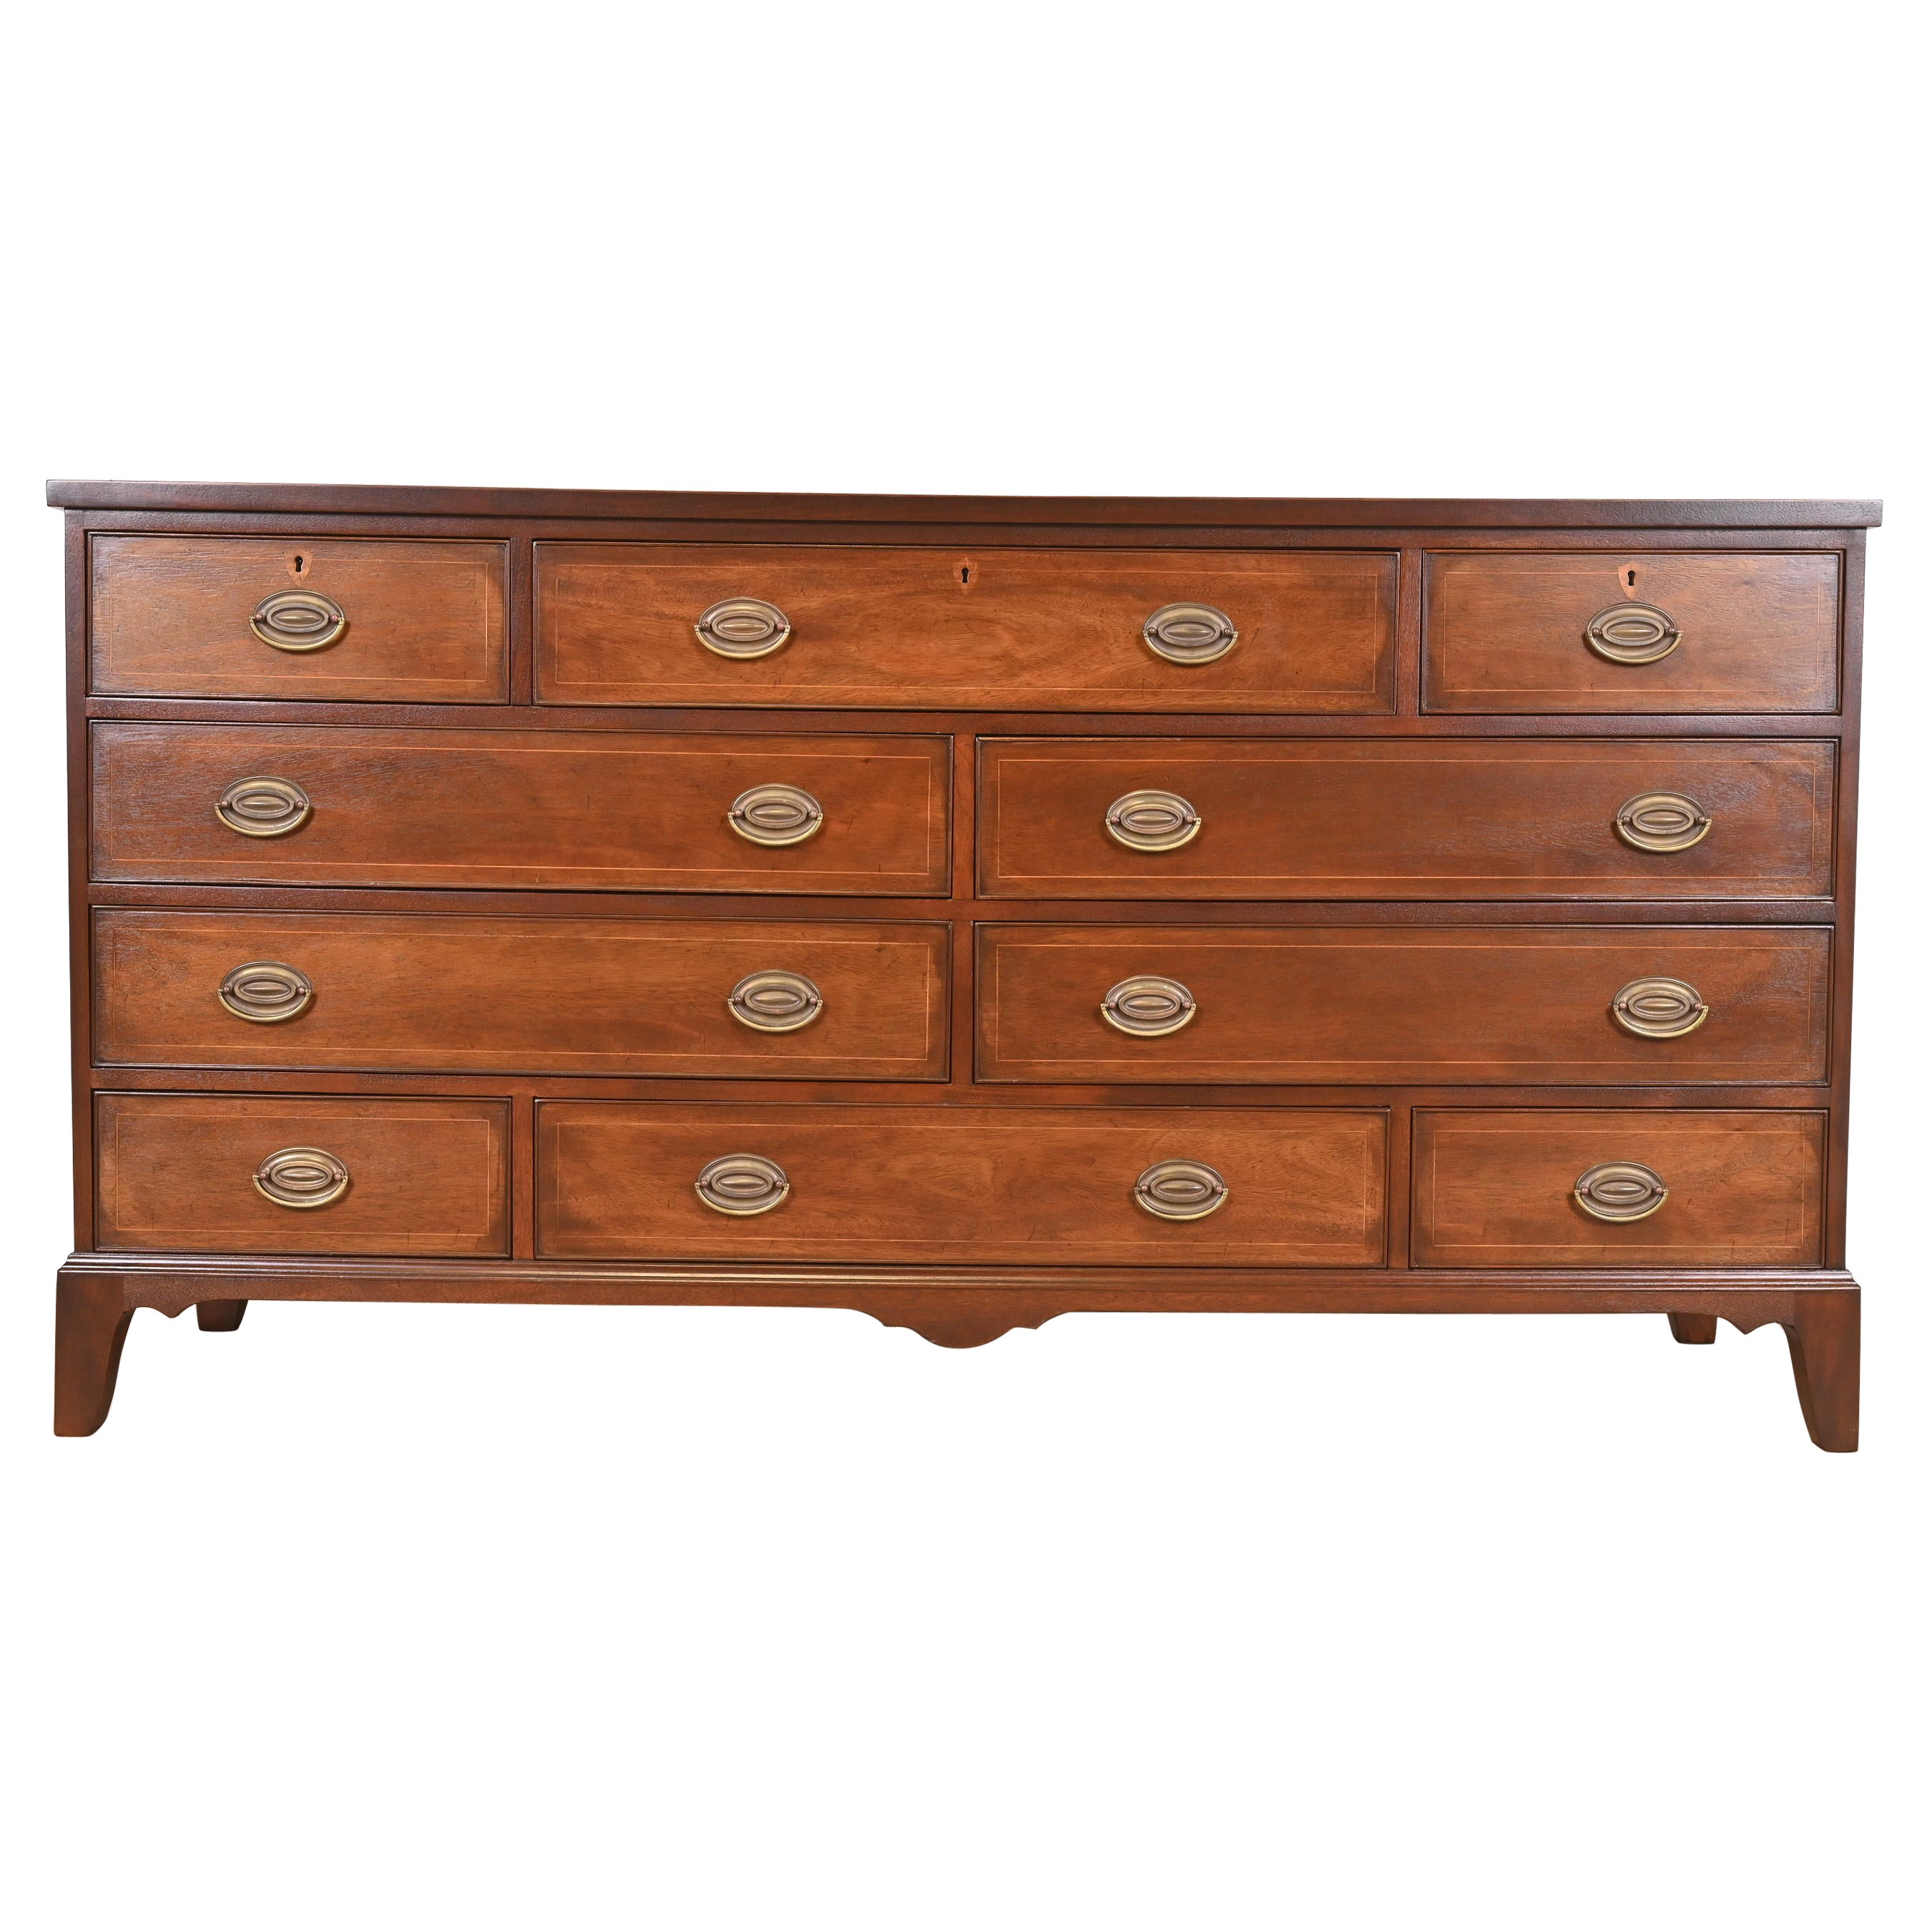 Kittinger Federal Inlaid Mahogany Ten-Drawer Dresser, Newly Refinished For Sale